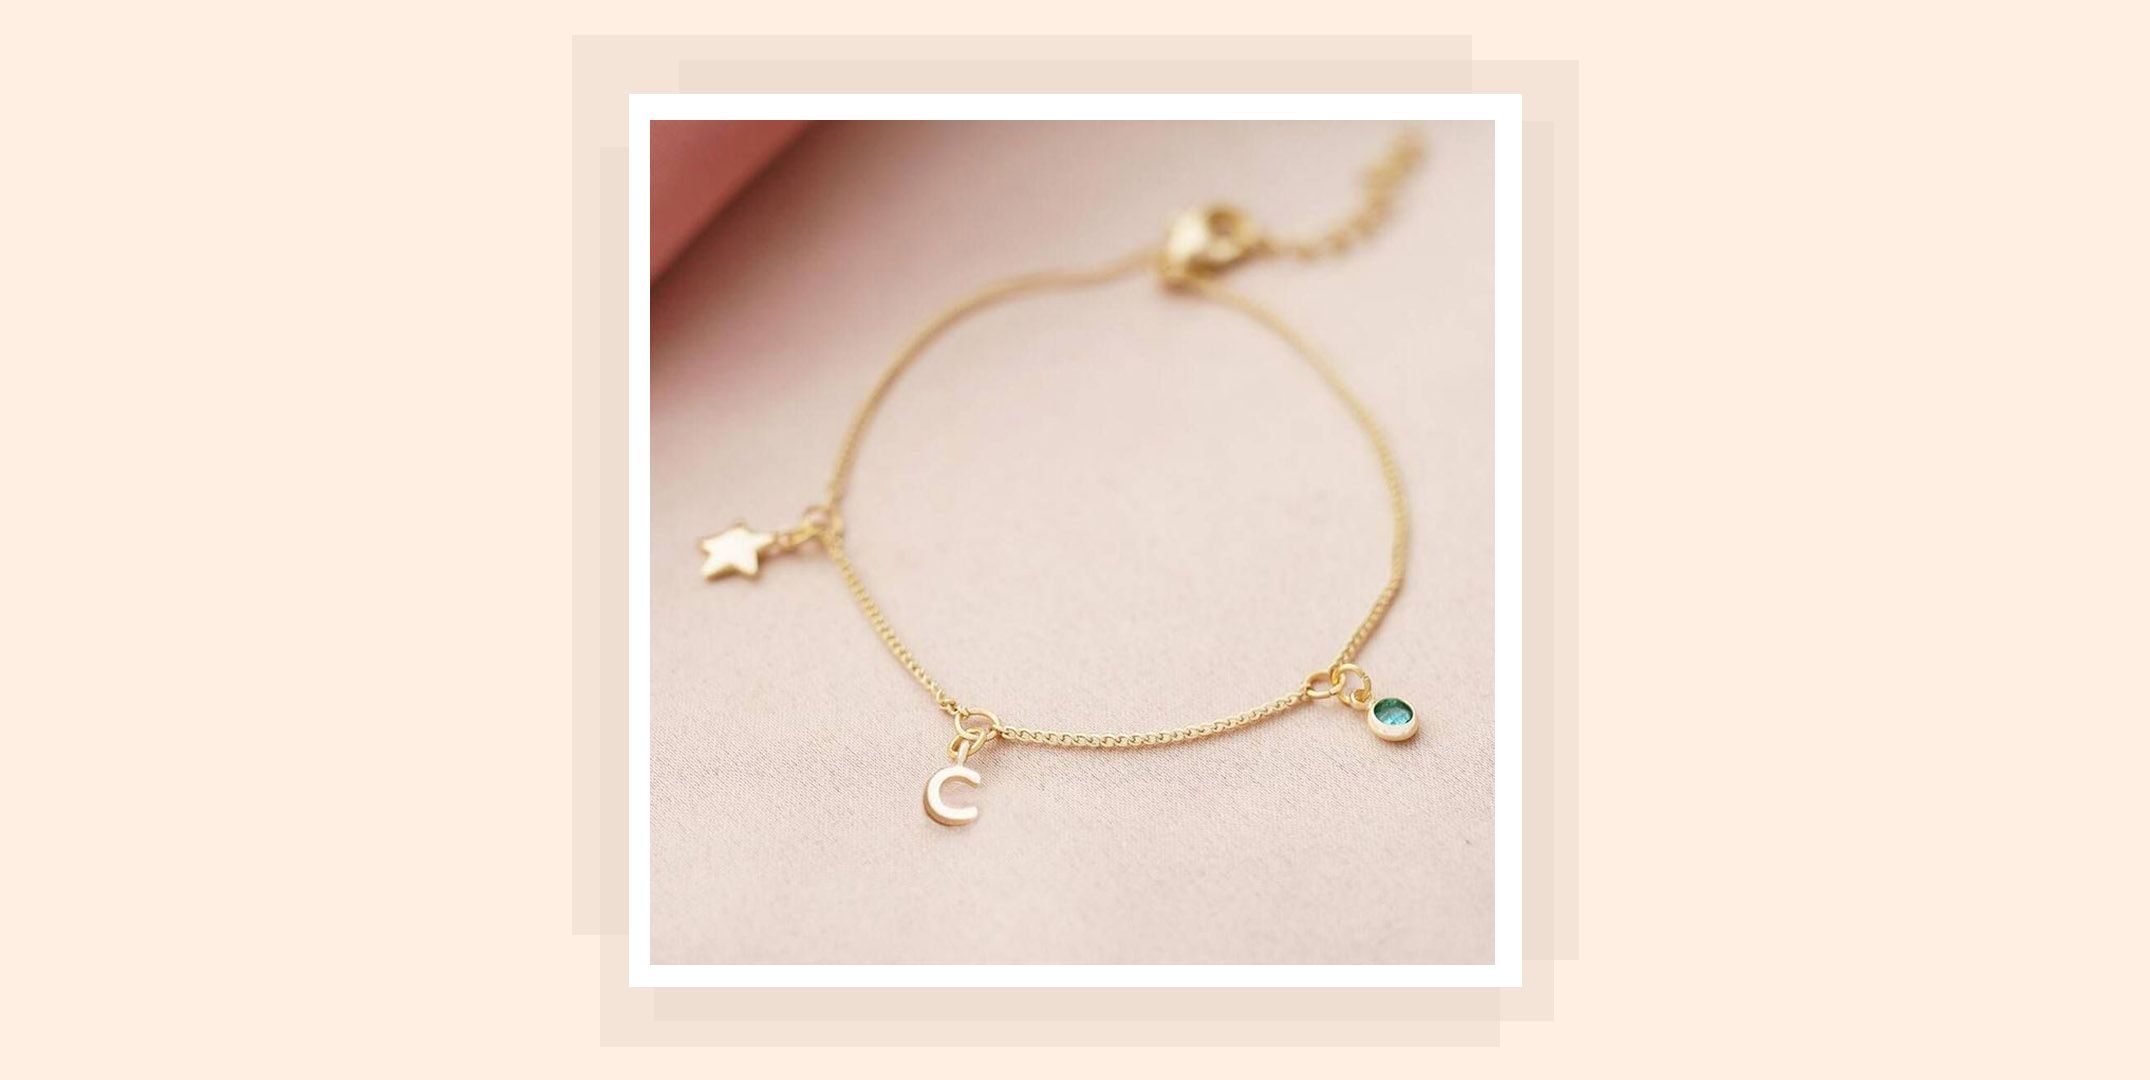 Unique & Affordable Bracelet Gifts: Personalized, Gold Options - Perfectly  Average